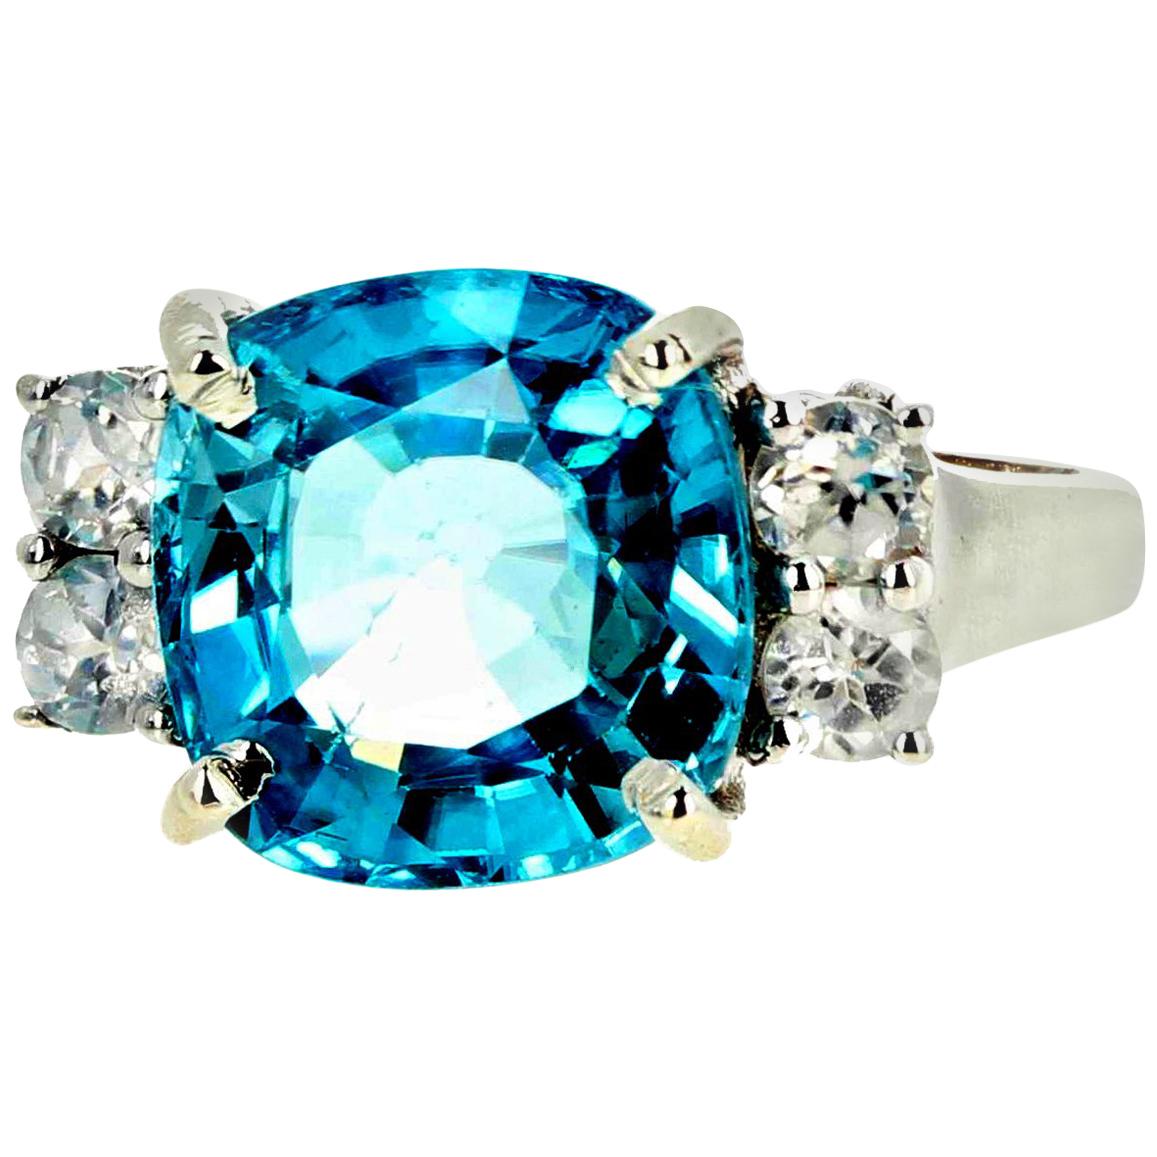 AJD Intense Blue 6.82Ct. Natural Cambodian Zircon & Real Diamonds Cocktail Ring